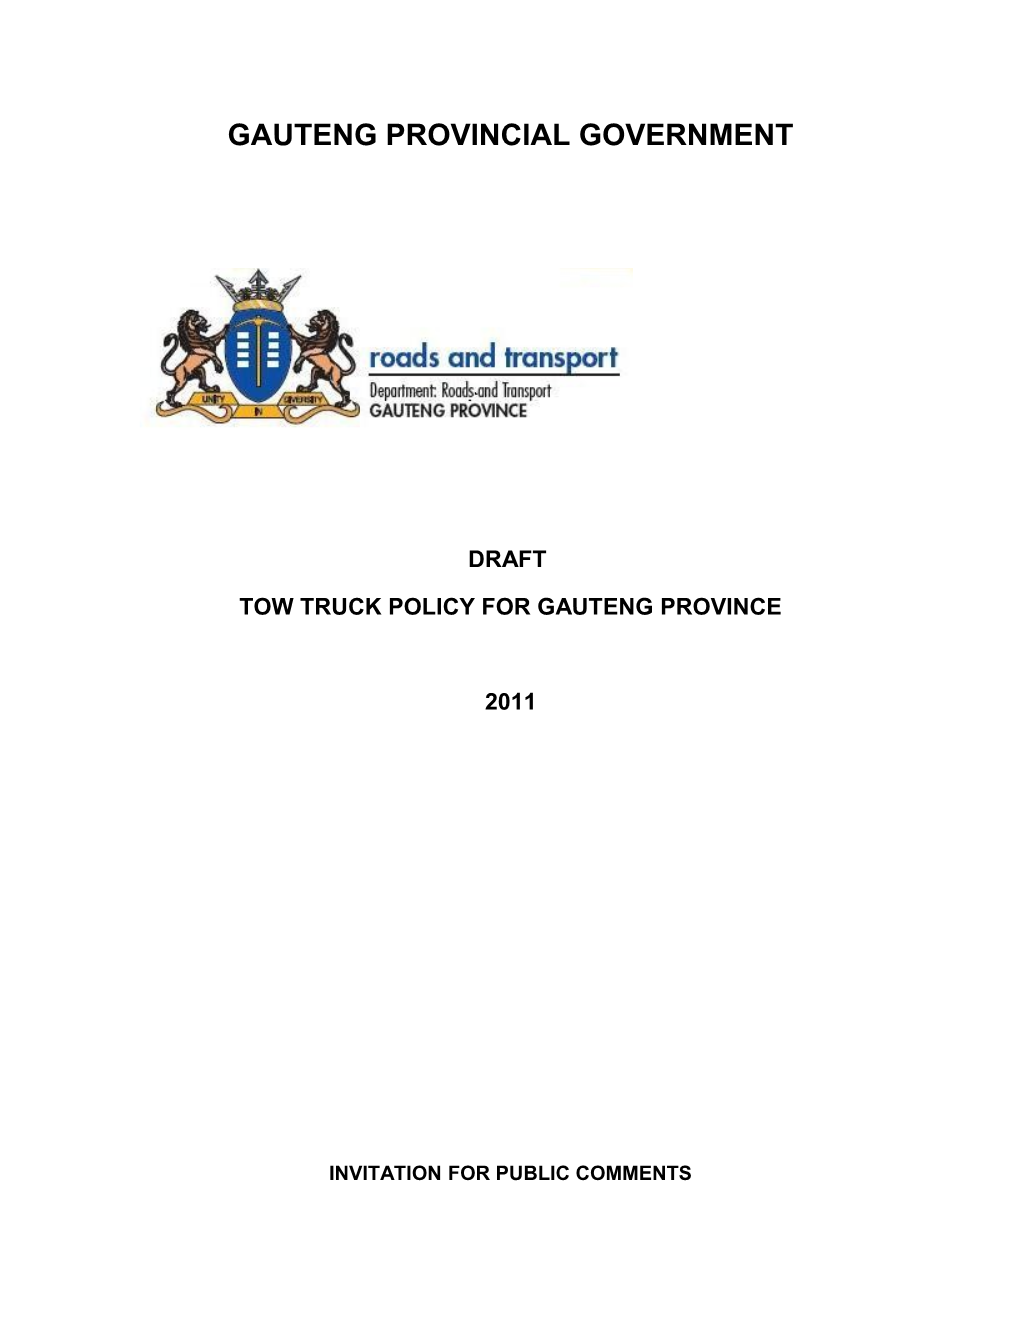 Tow Truck Policy for Gauteng Province